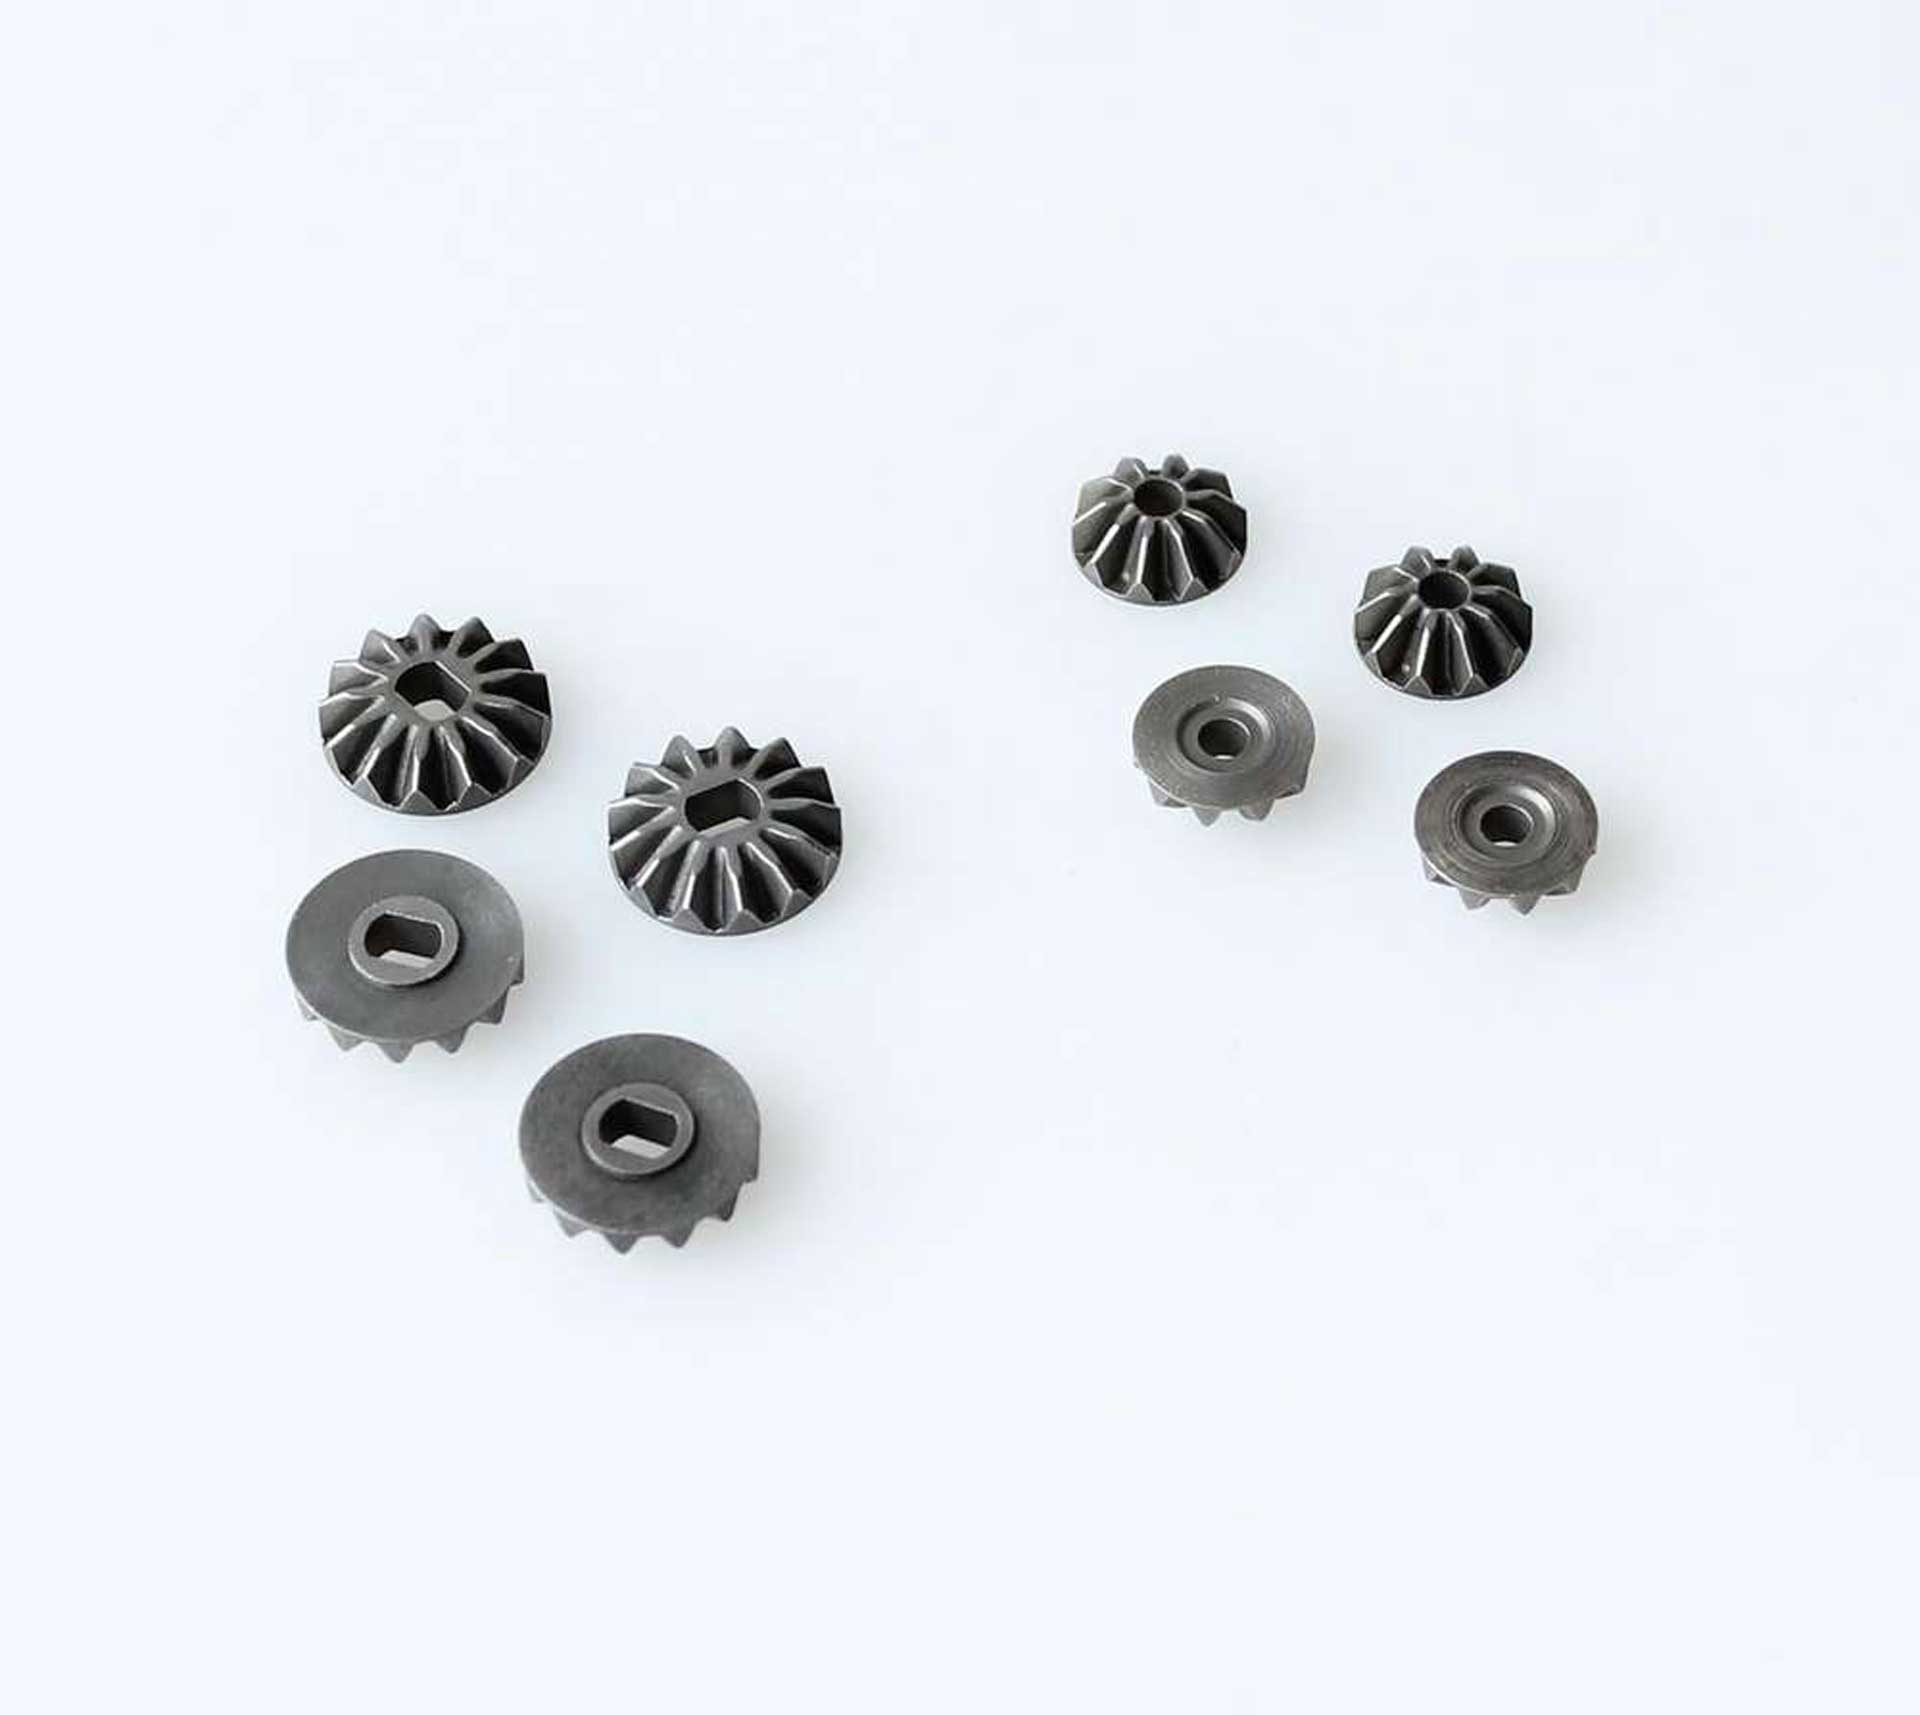 DRIVE & FLY MODELS DIFFERENTIAL BEVEL GEARS DF-4